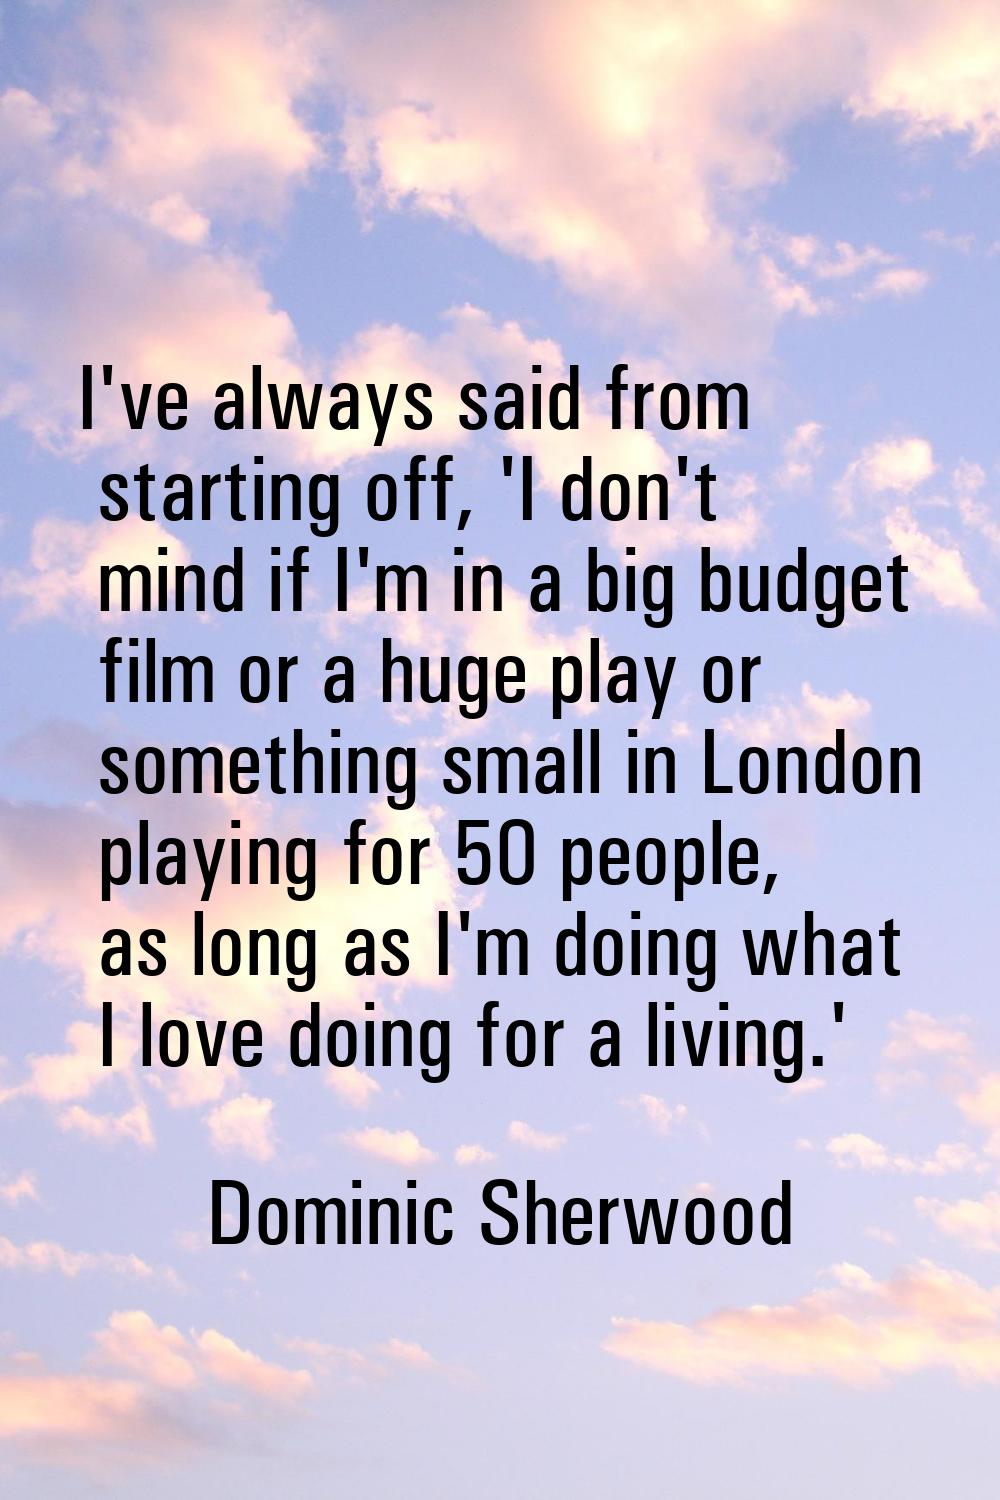 I've always said from starting off, 'I don't mind if I'm in a big budget film or a huge play or som